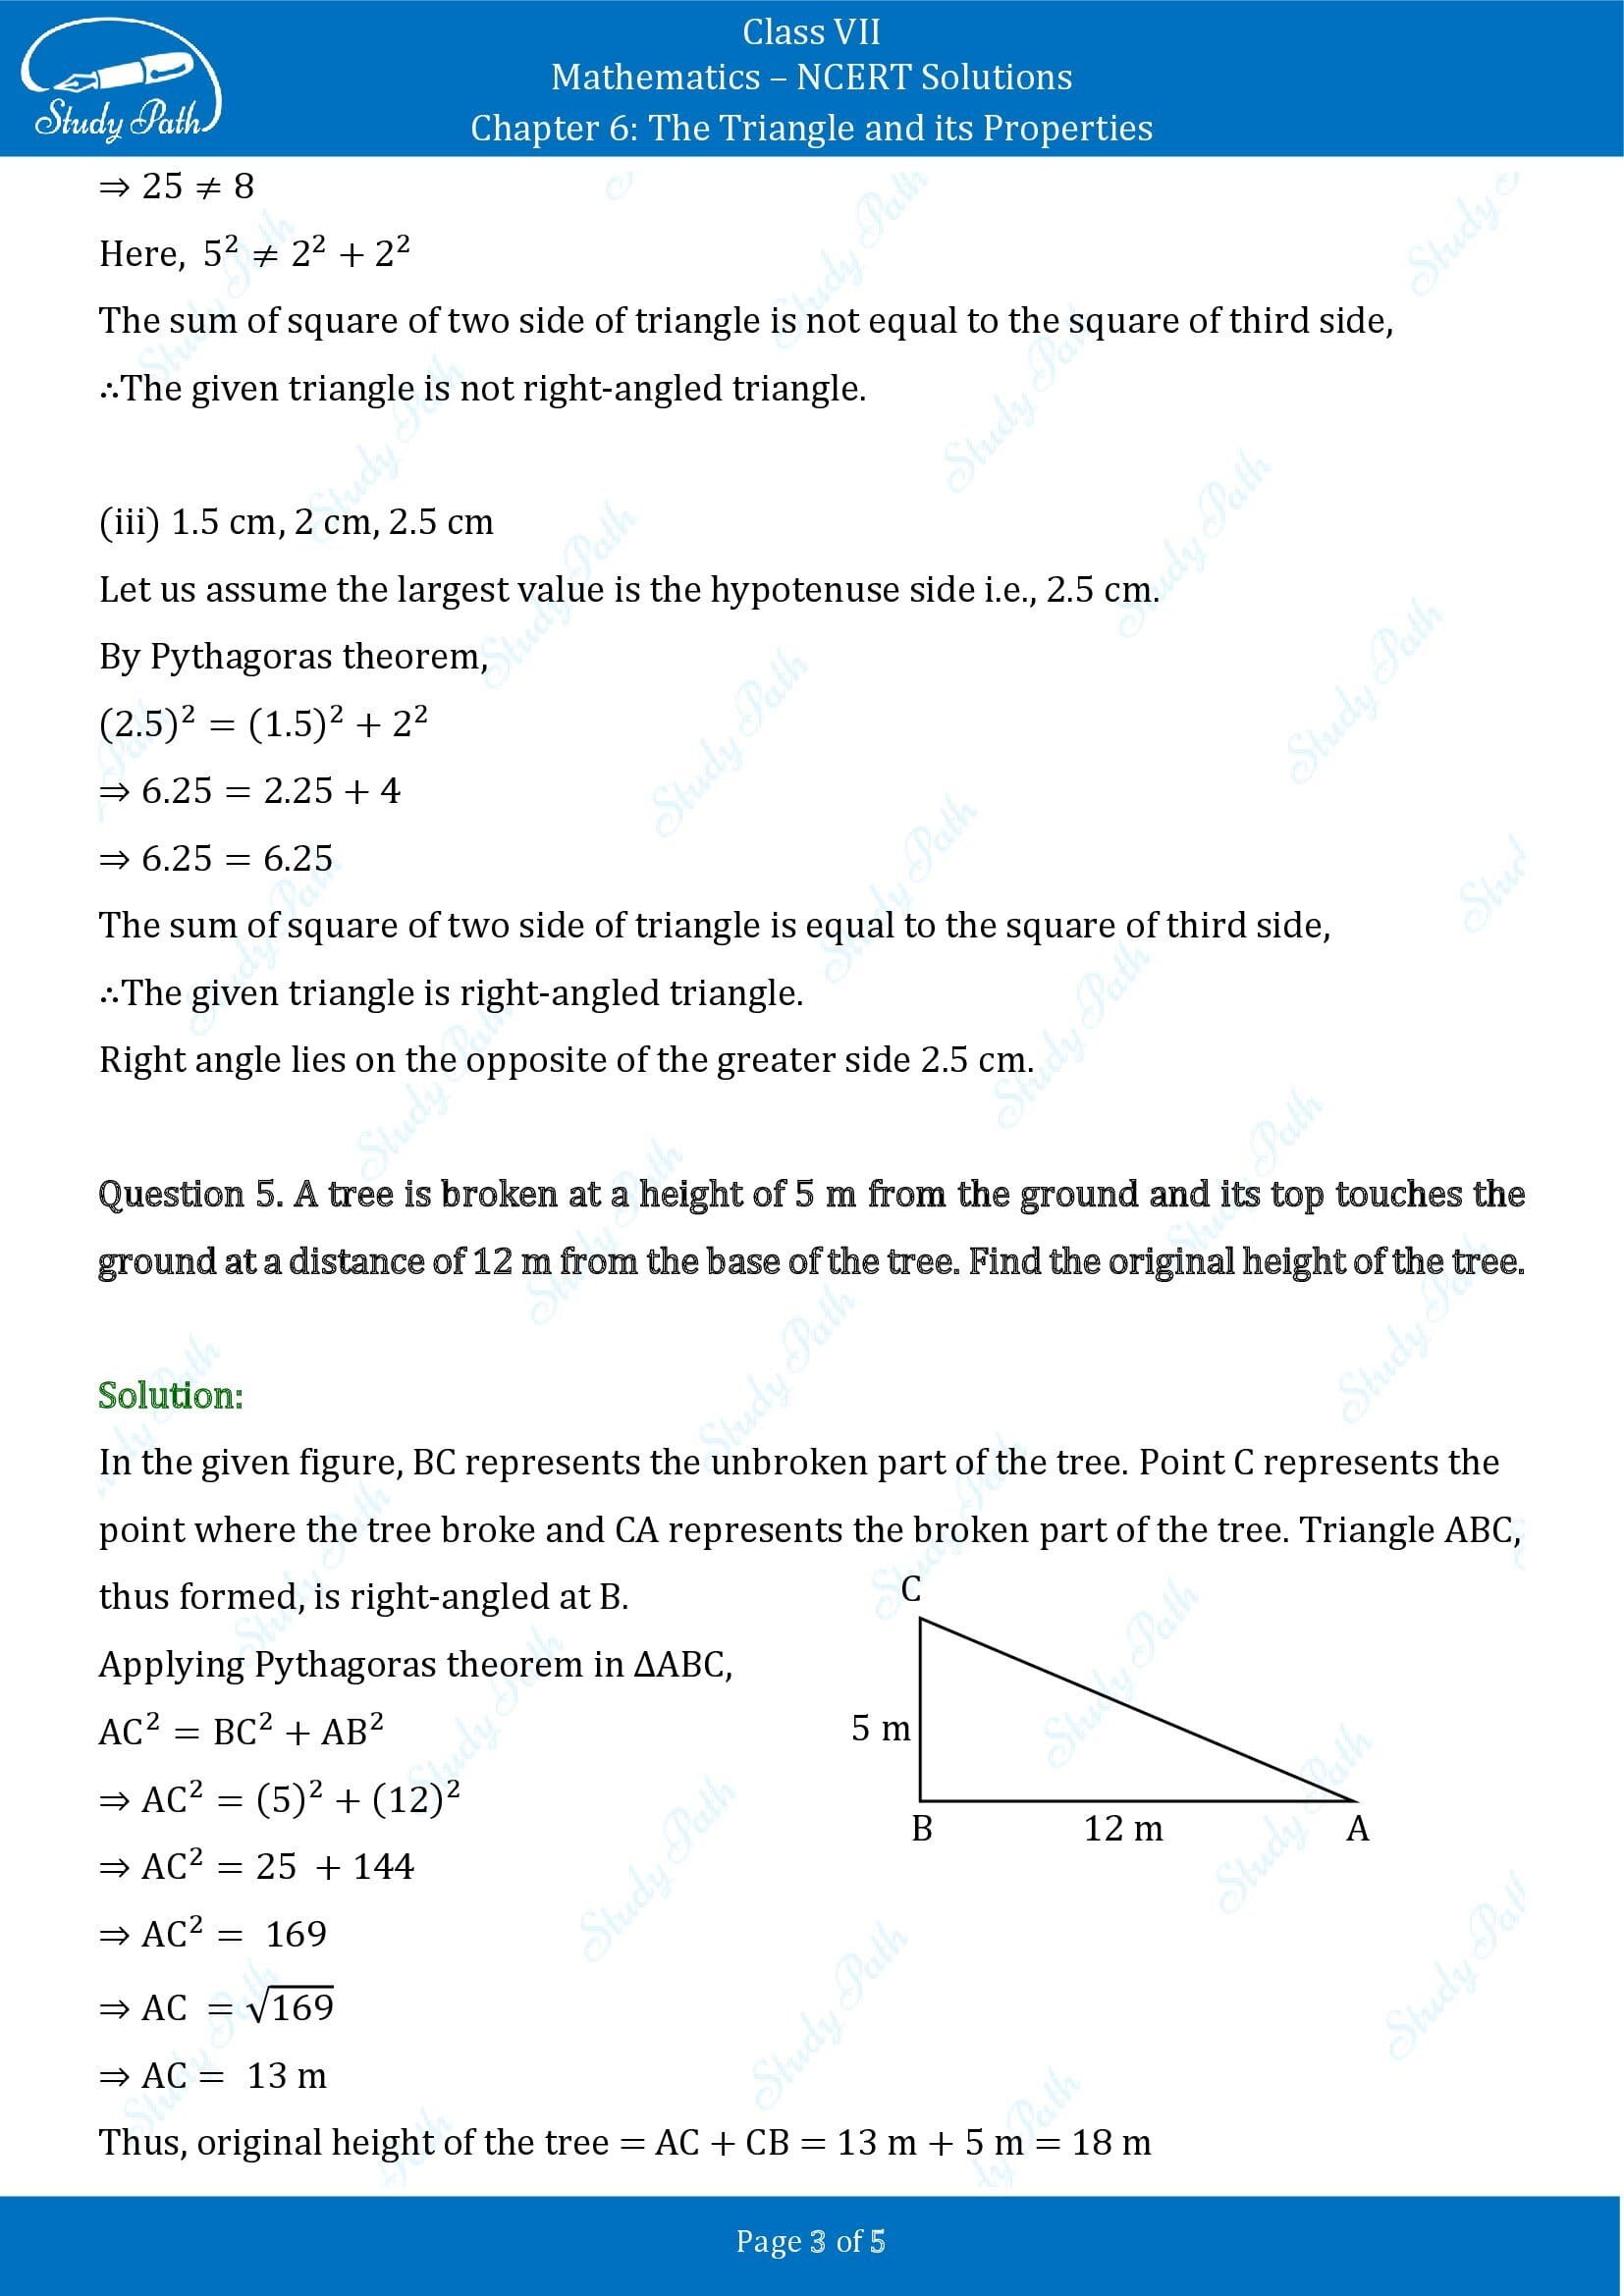 NCERT Solutions for Class 7 Maths Chapter 6 The Triangle and its Properties Exercise 6.5 00003